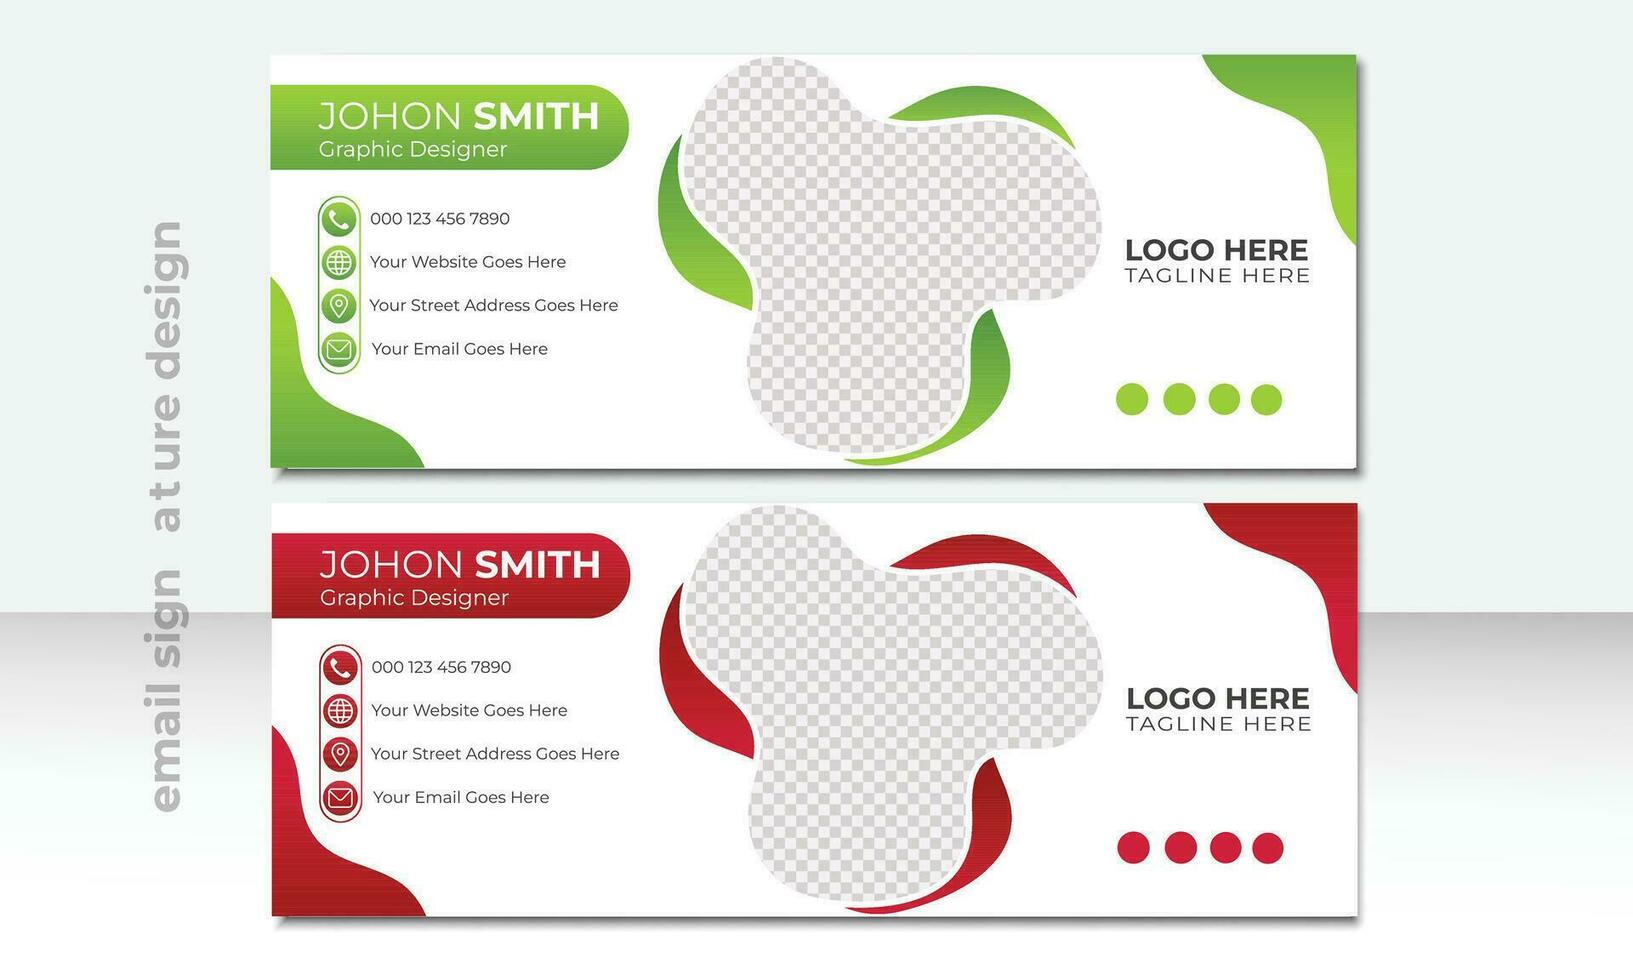 Email signature template vector illustration. Professional geometric business and corporate email signature